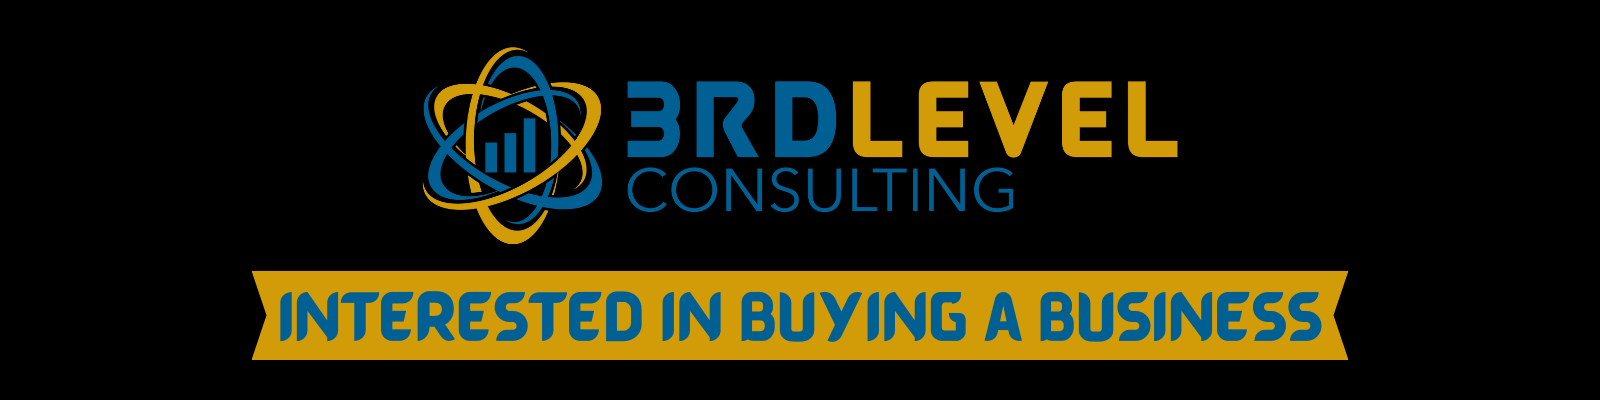 3rd Level Consulting Logo